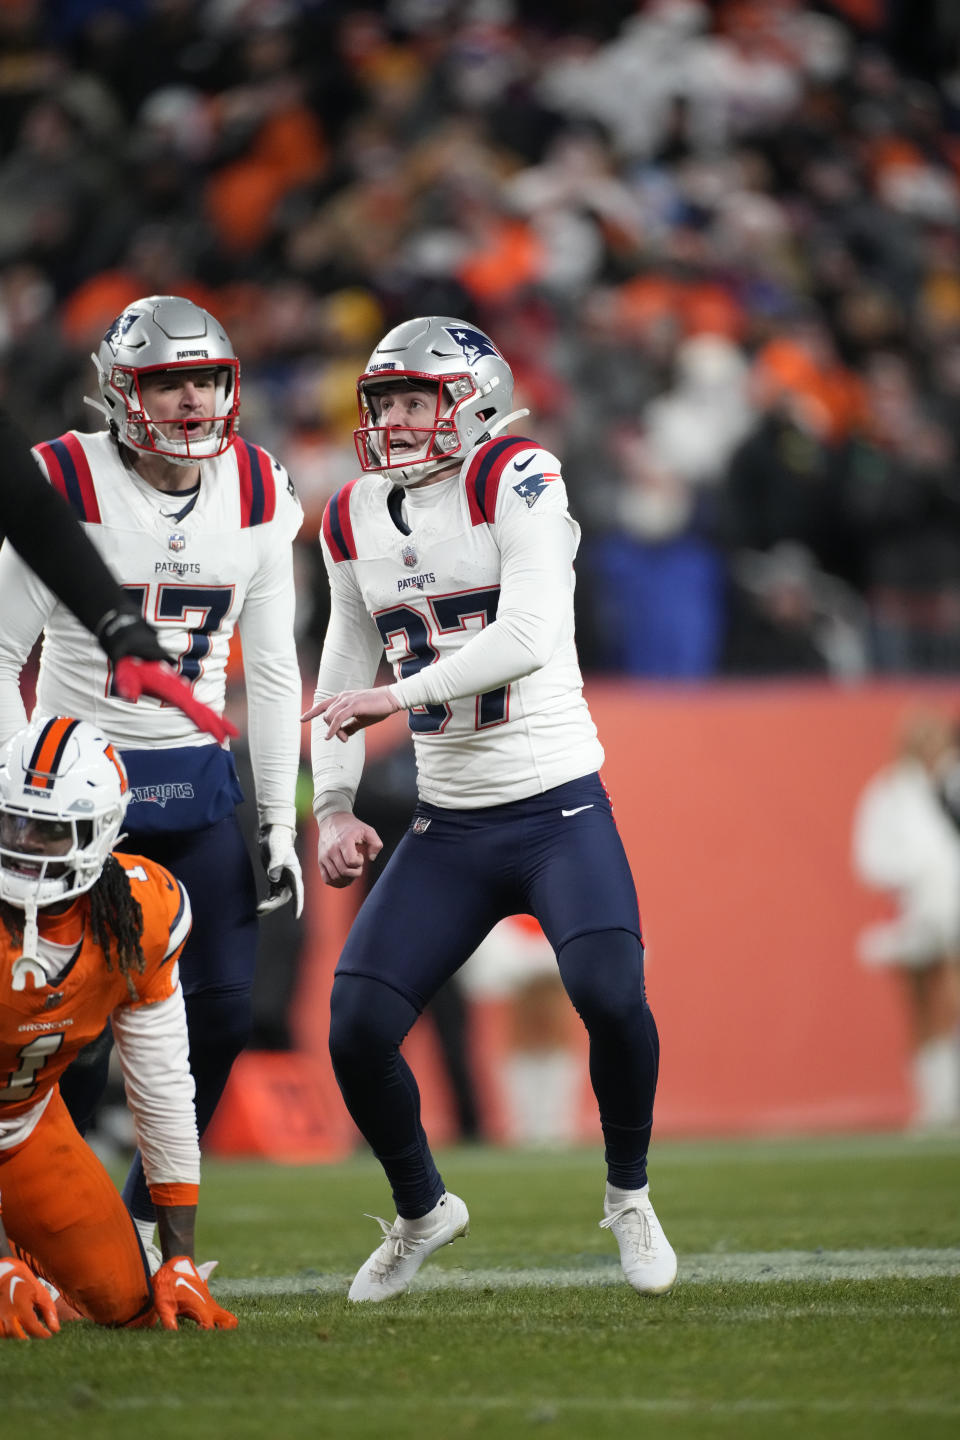 New England Patriots place-kicker Chad Ryland (37) kicks the game winning field goal with second left during the second half of an NFL football game against the Denver Broncos, Sunday, Dec. 24, 2023, in Denver. (AP Photo/David Zalubowski)